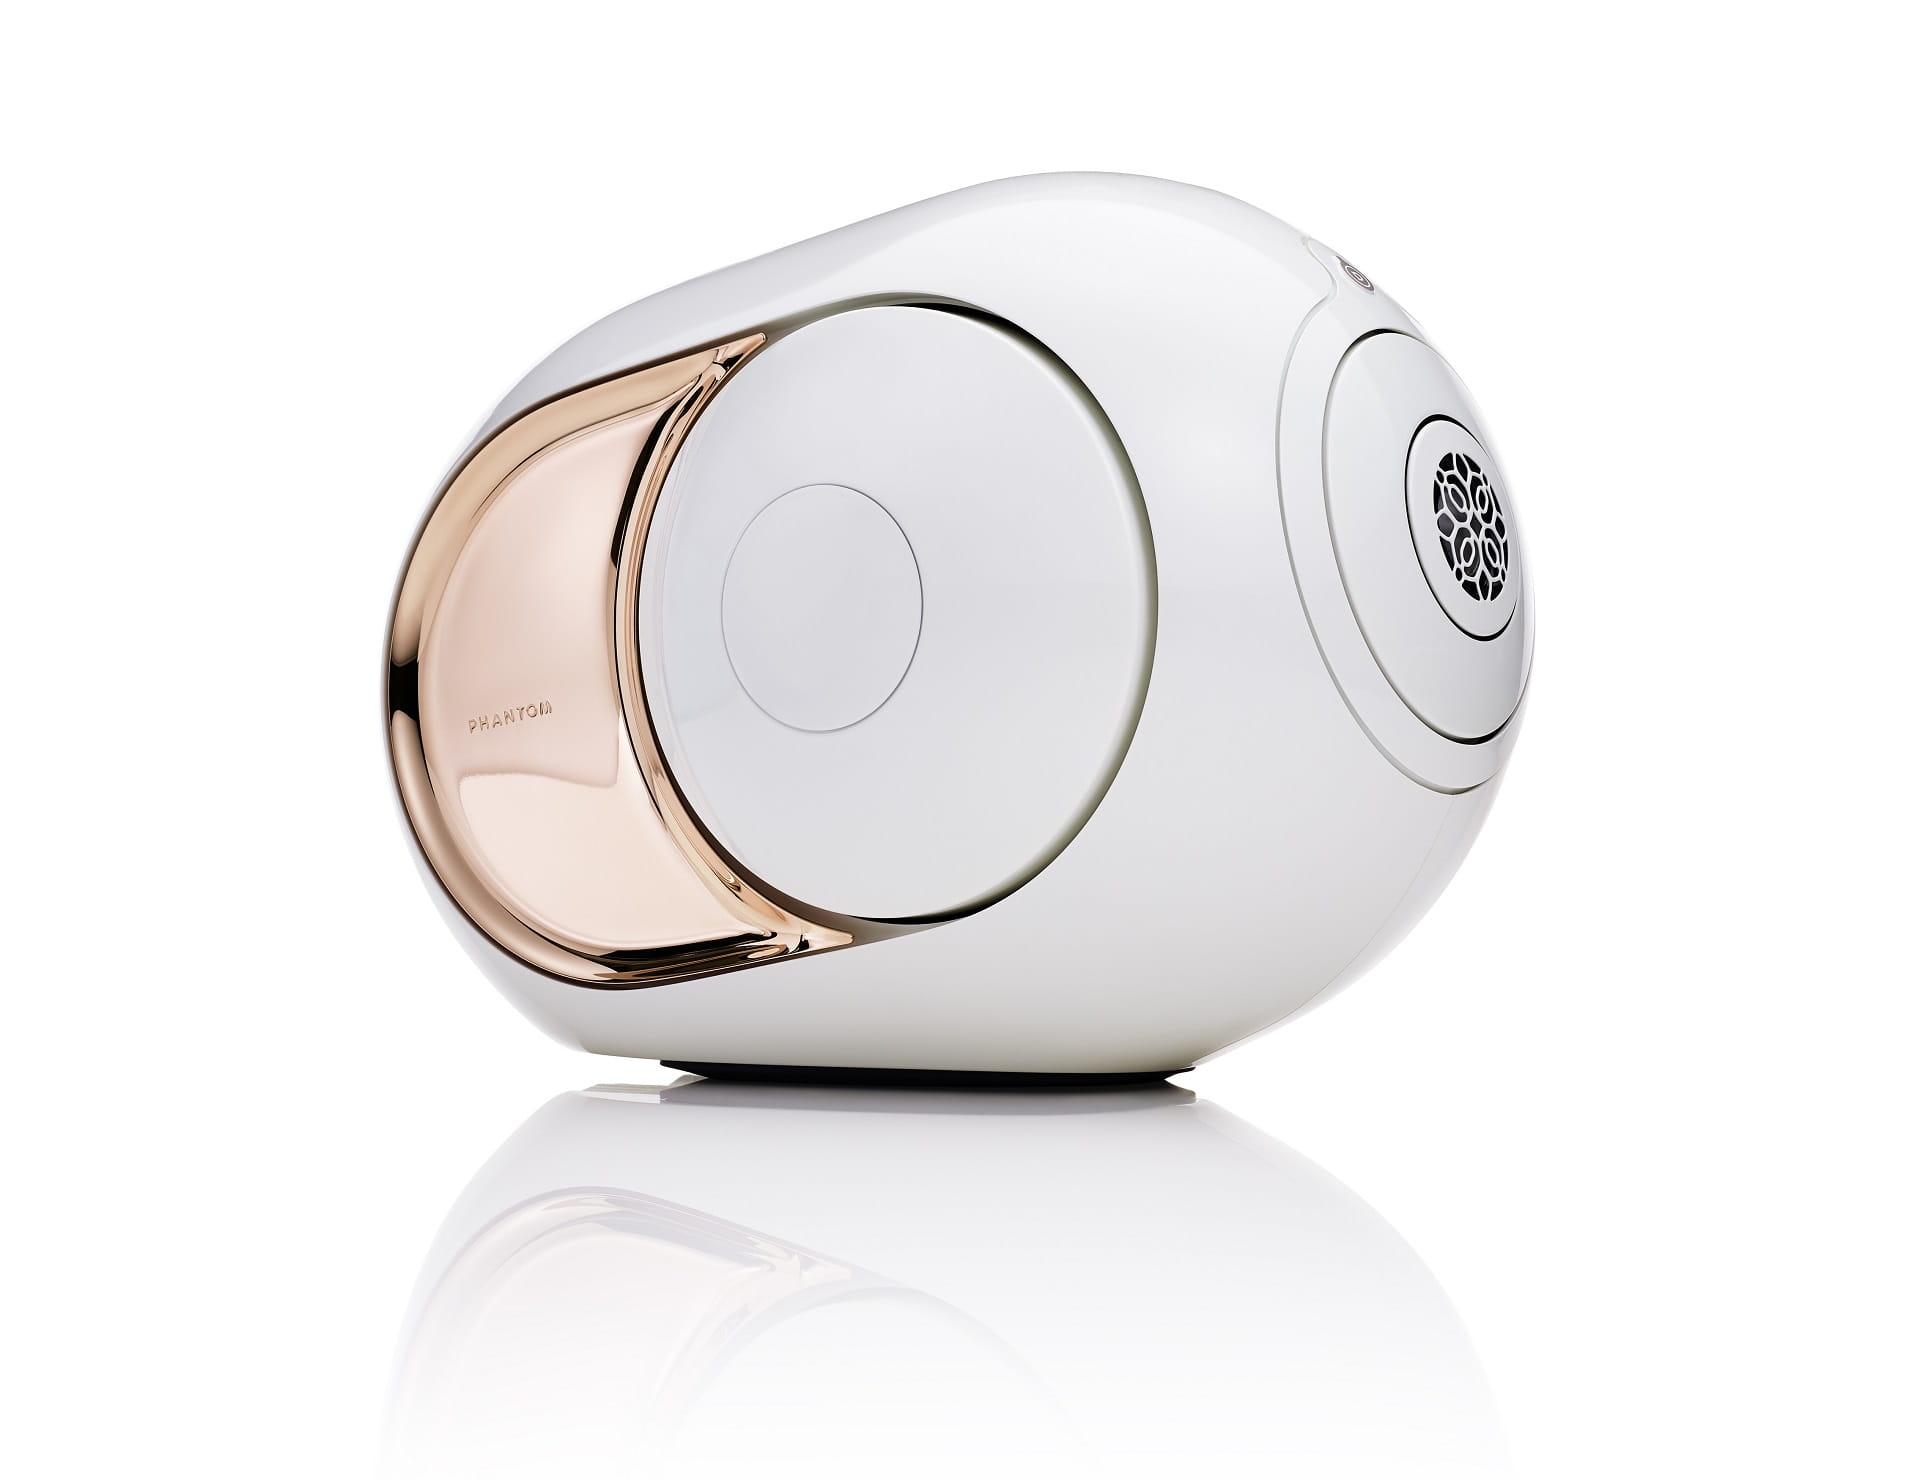 The Devialet Phantom looks good and backs it up with performance